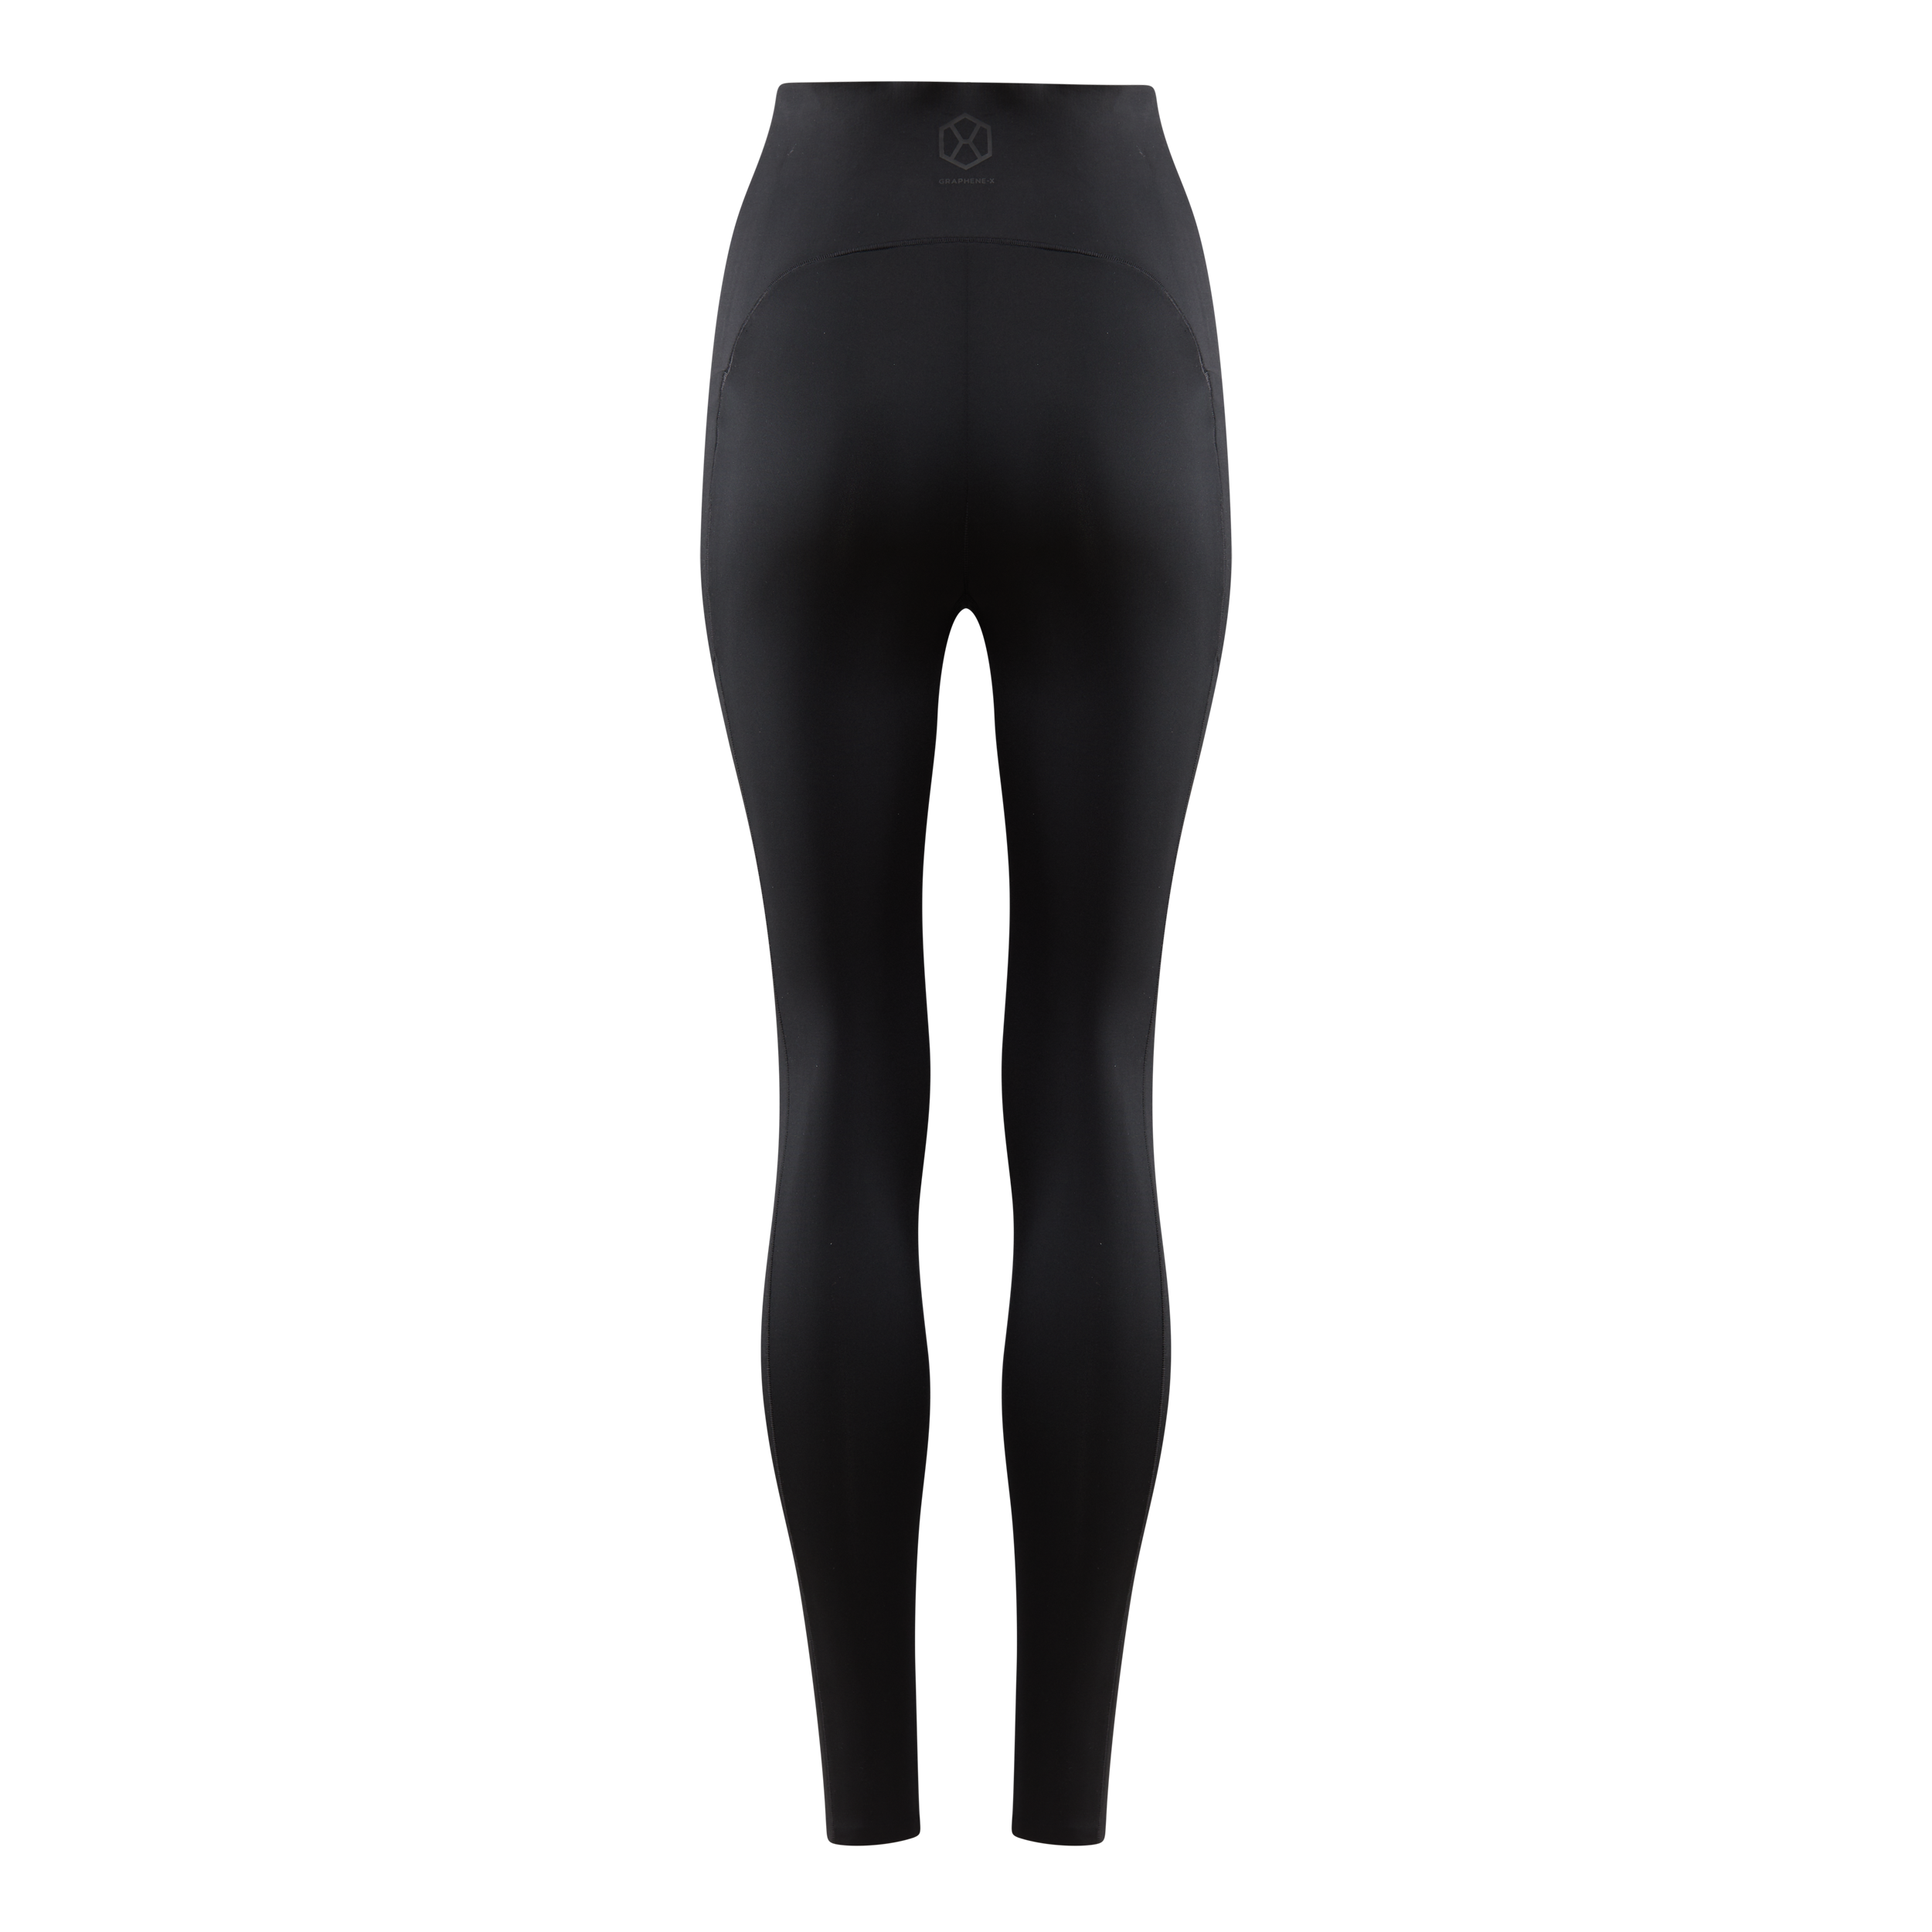 Carbon 38 liquid leggings Size Small. Worn once in great condition!